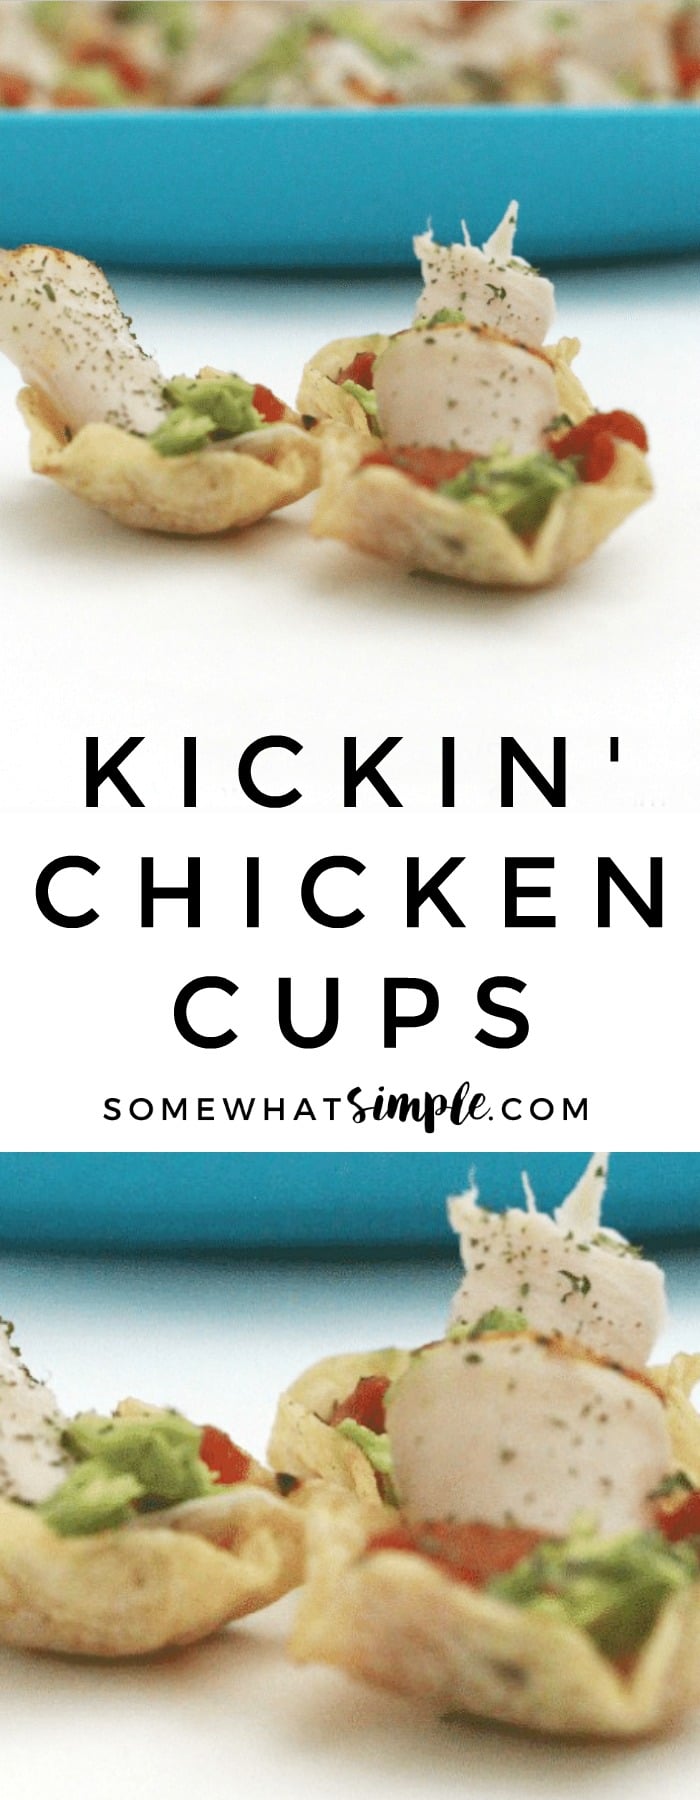 Kickin' Chicken Cups are healthy snacks and so easy to prepare. They are a perfect appetizer or afternoon snack and they taste delicious! via @somewhatsimple